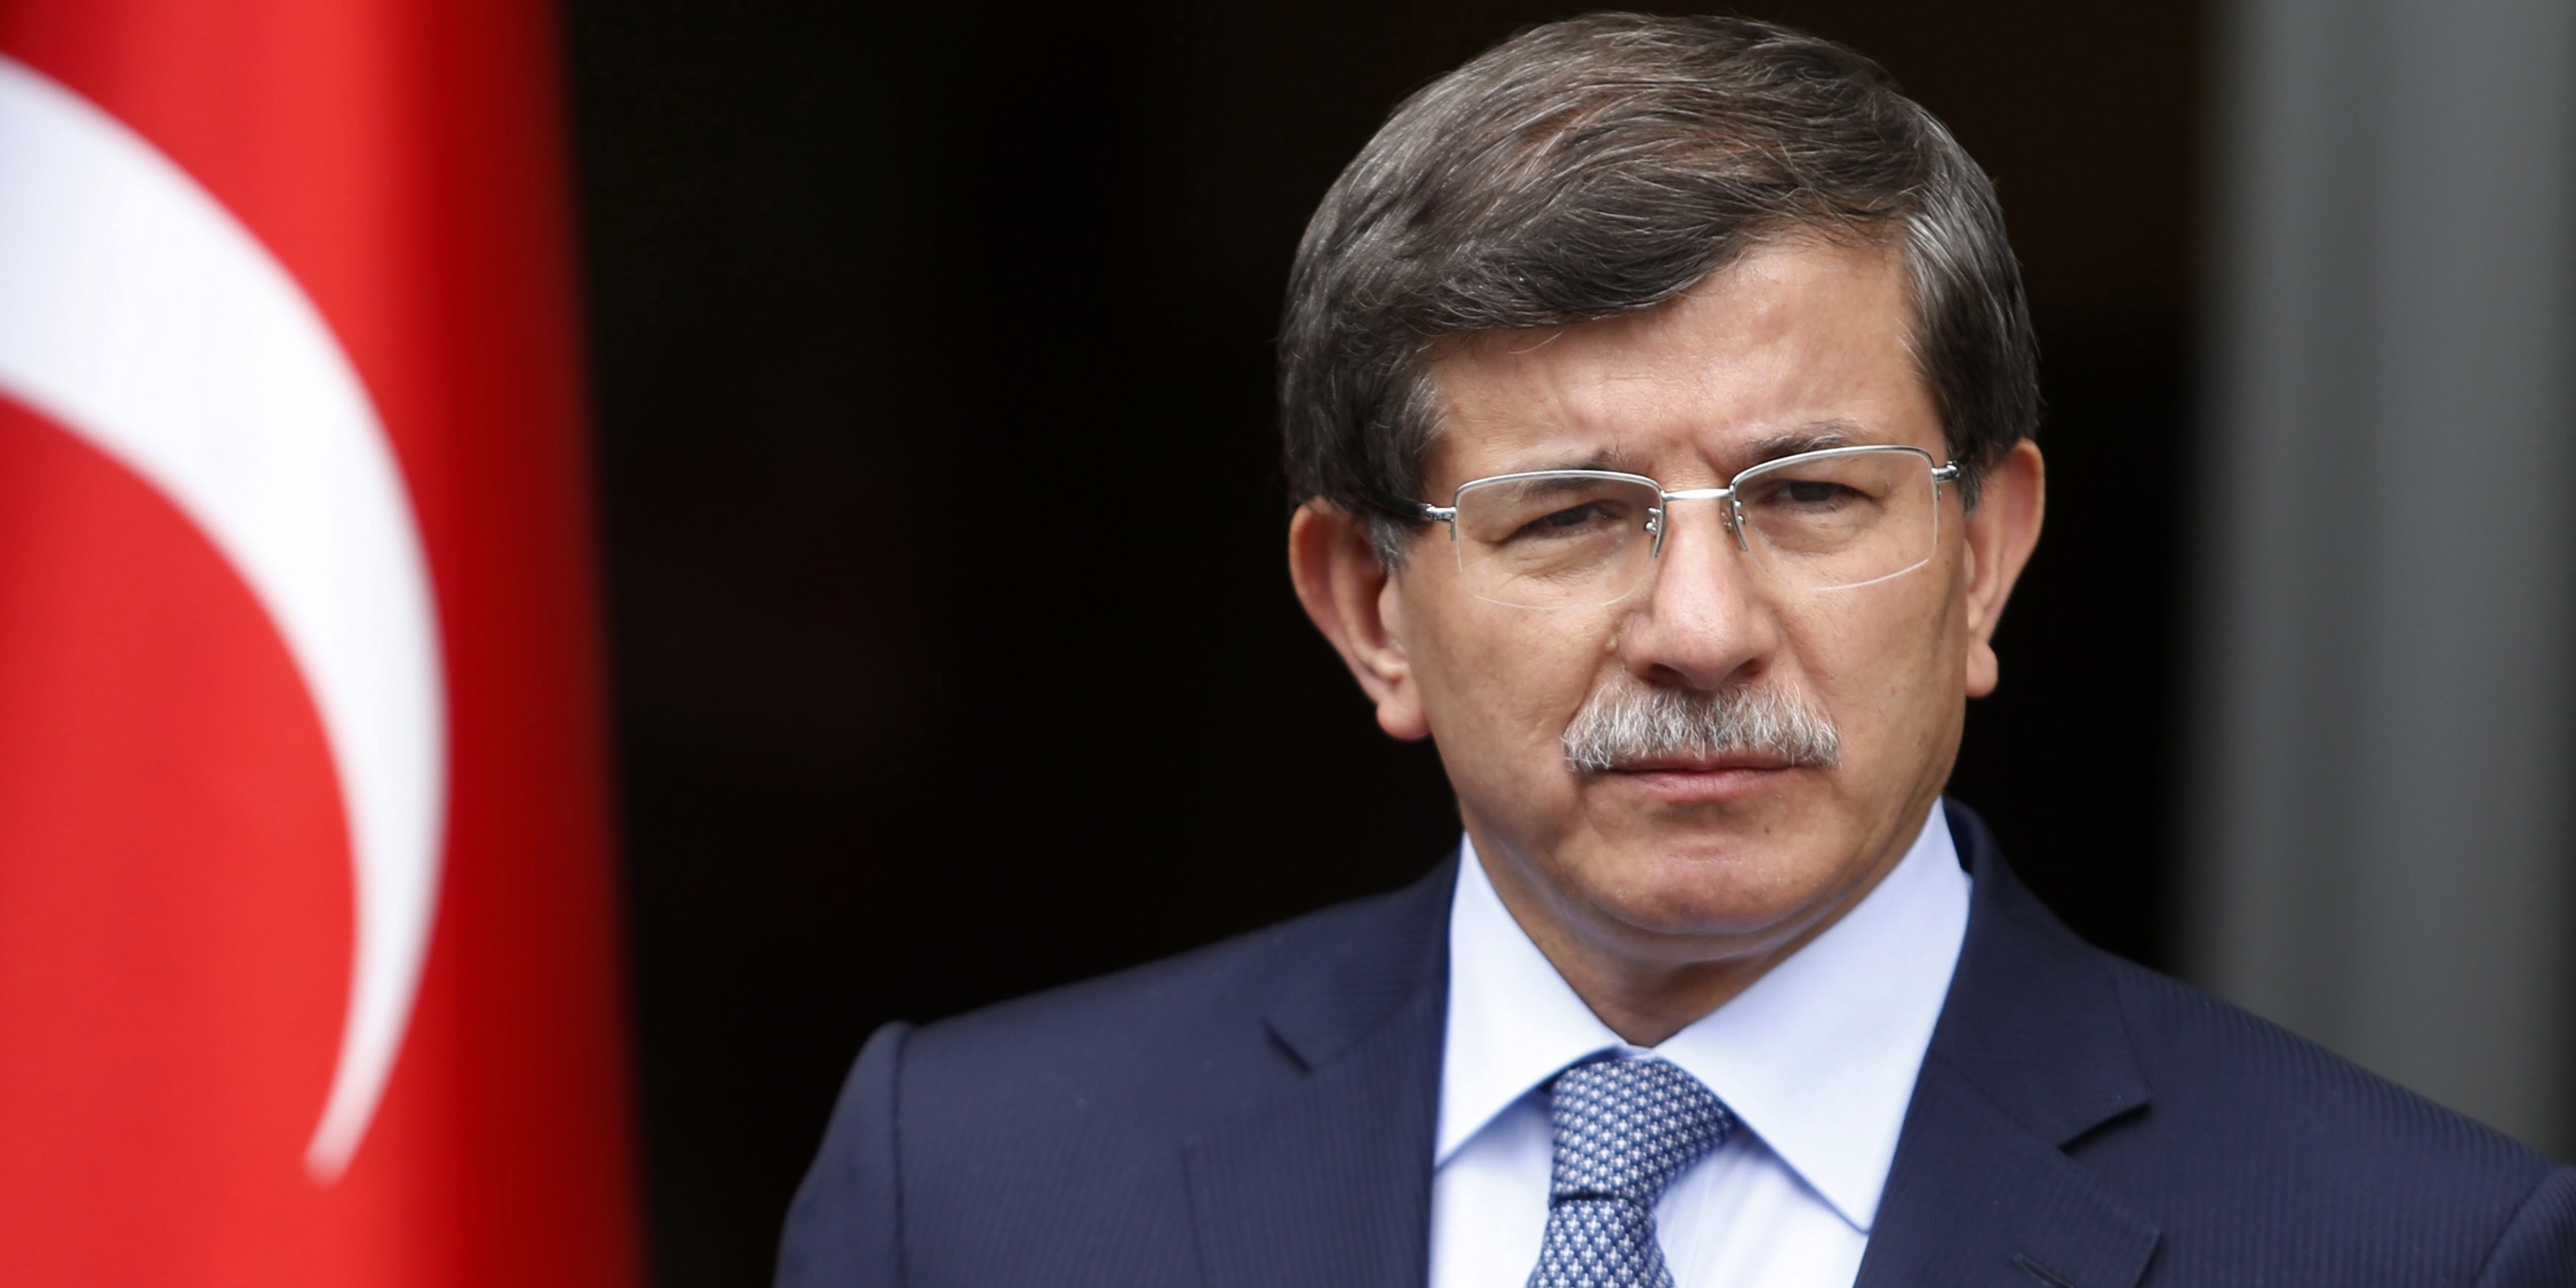 Former PM Davutoglu gives a new party message in Konya